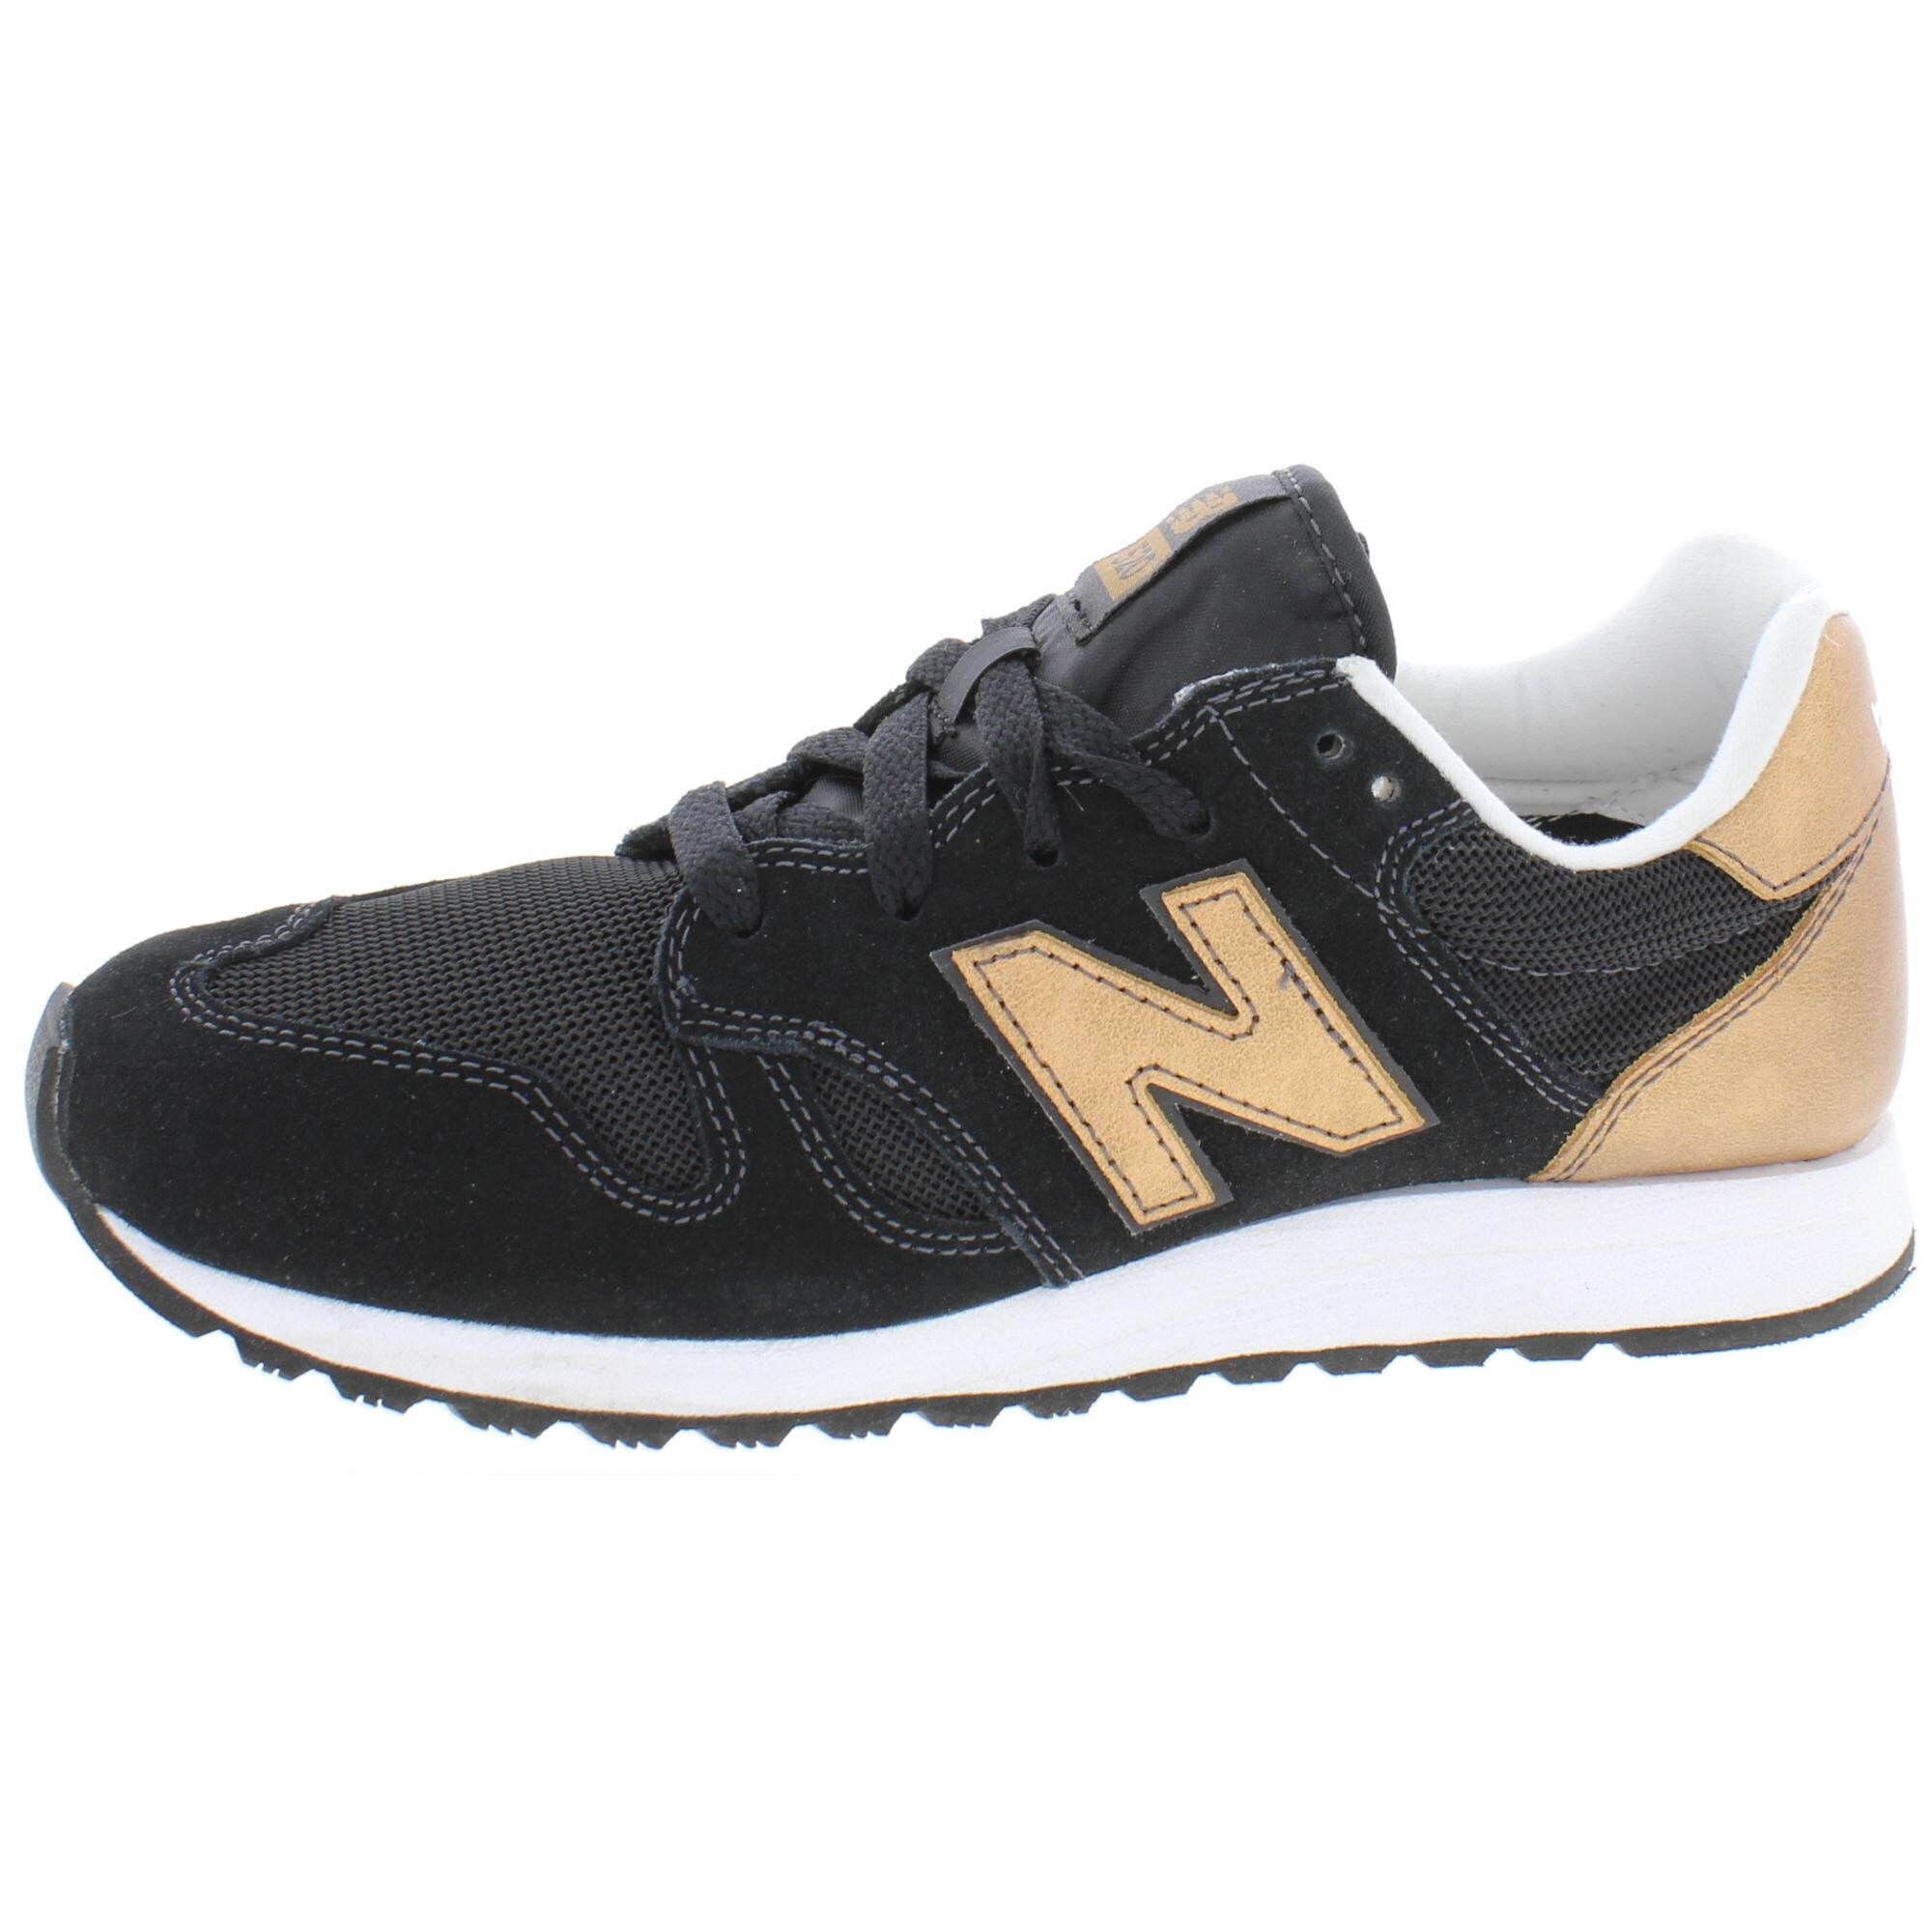 New Balance Women's WL520 Suede Casual Lifestyle Athletic Sneakers Shoes